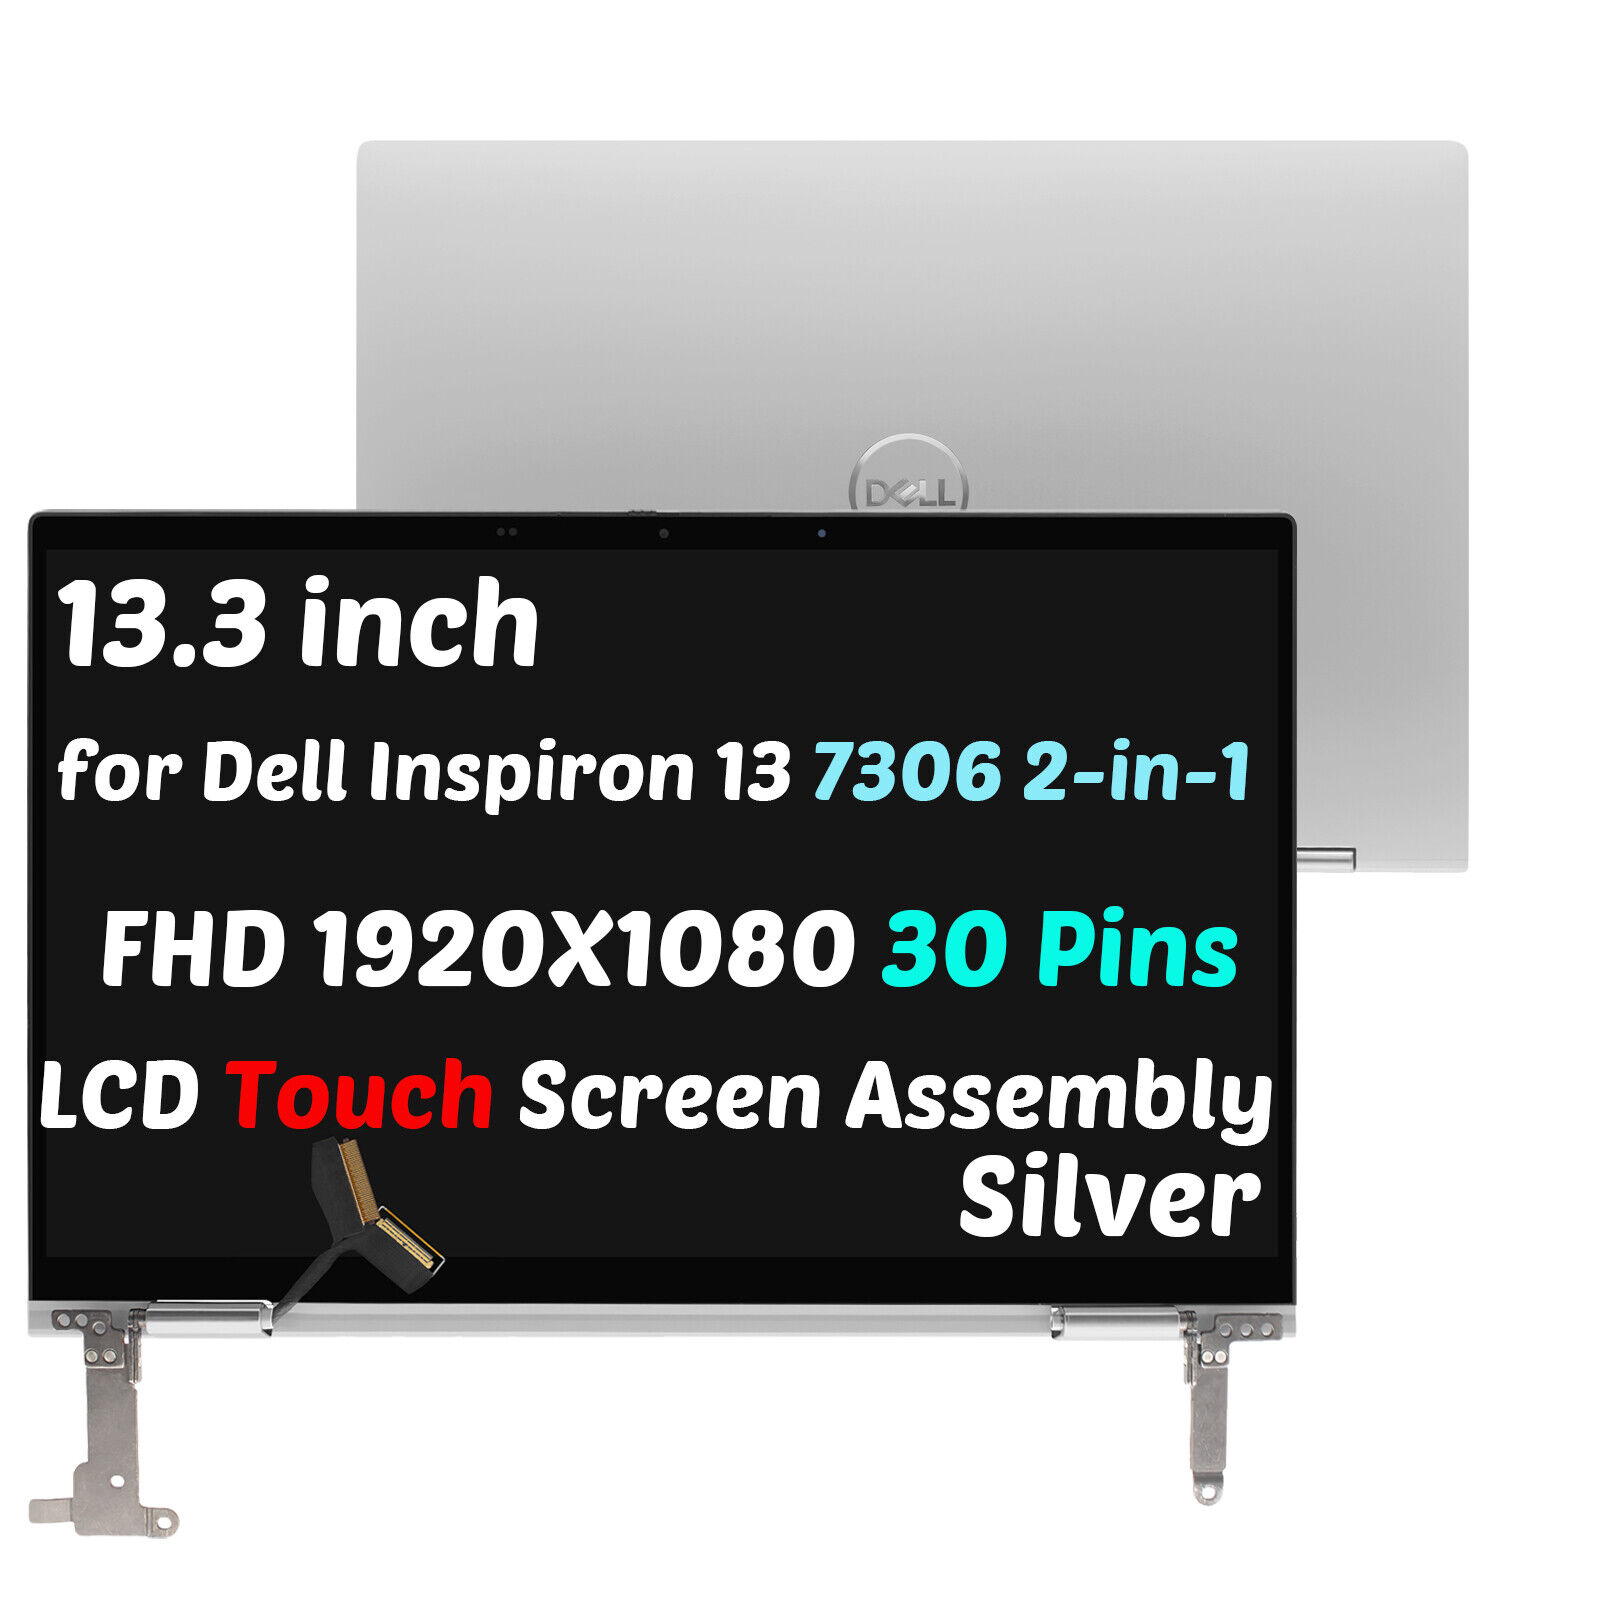 13.3in for Dell Inspiron 13 7306 2-in-1 LCD Touch Screen Assembly FHDKN Silver